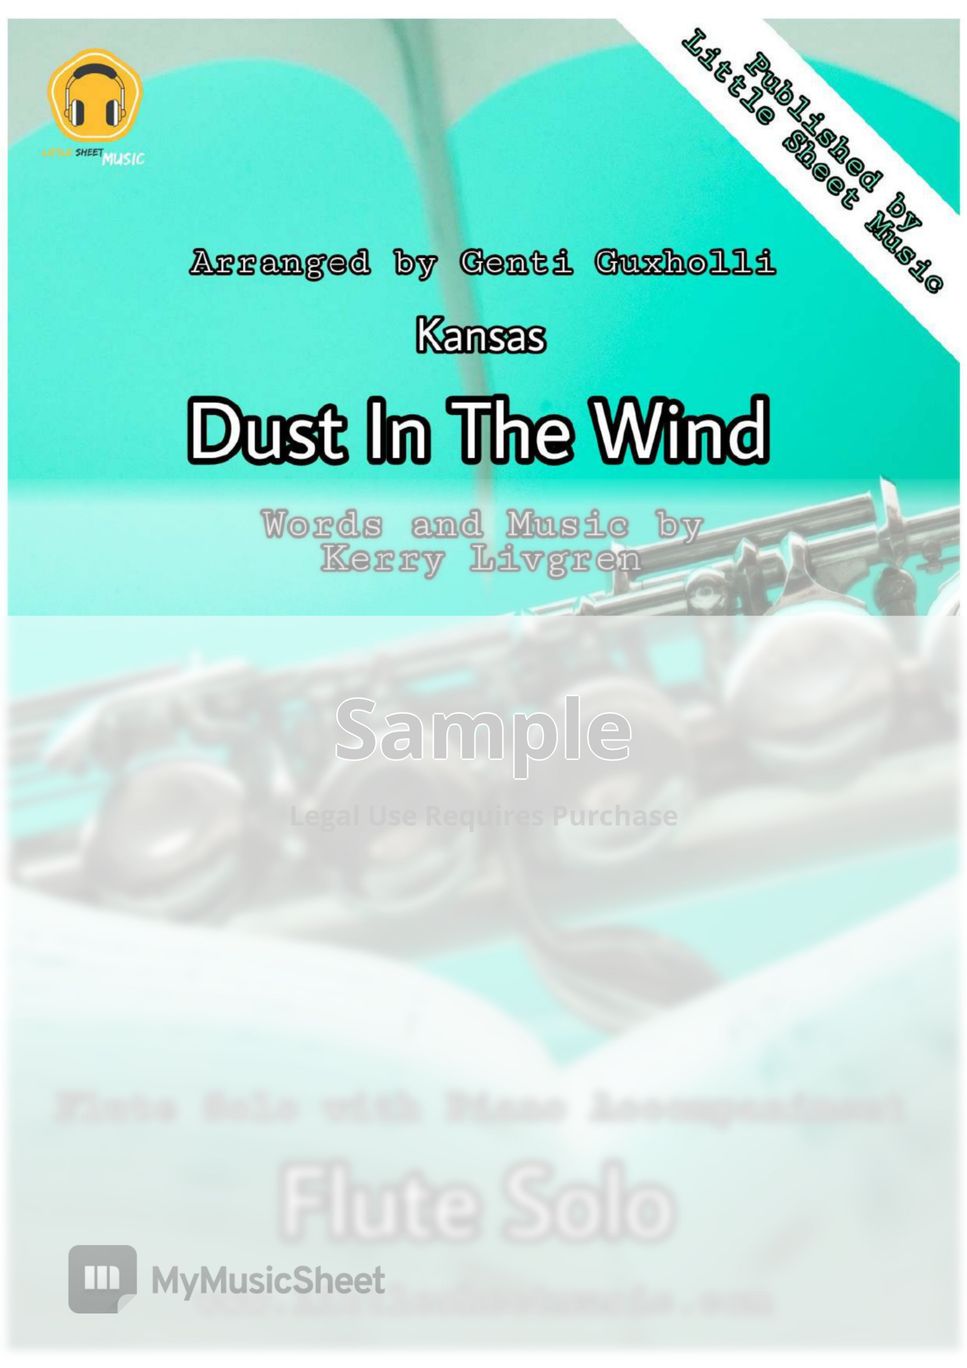 Kansas - Dust In The Wind (Flute Solo with Piano Accompaniment) by Genti Guxholli